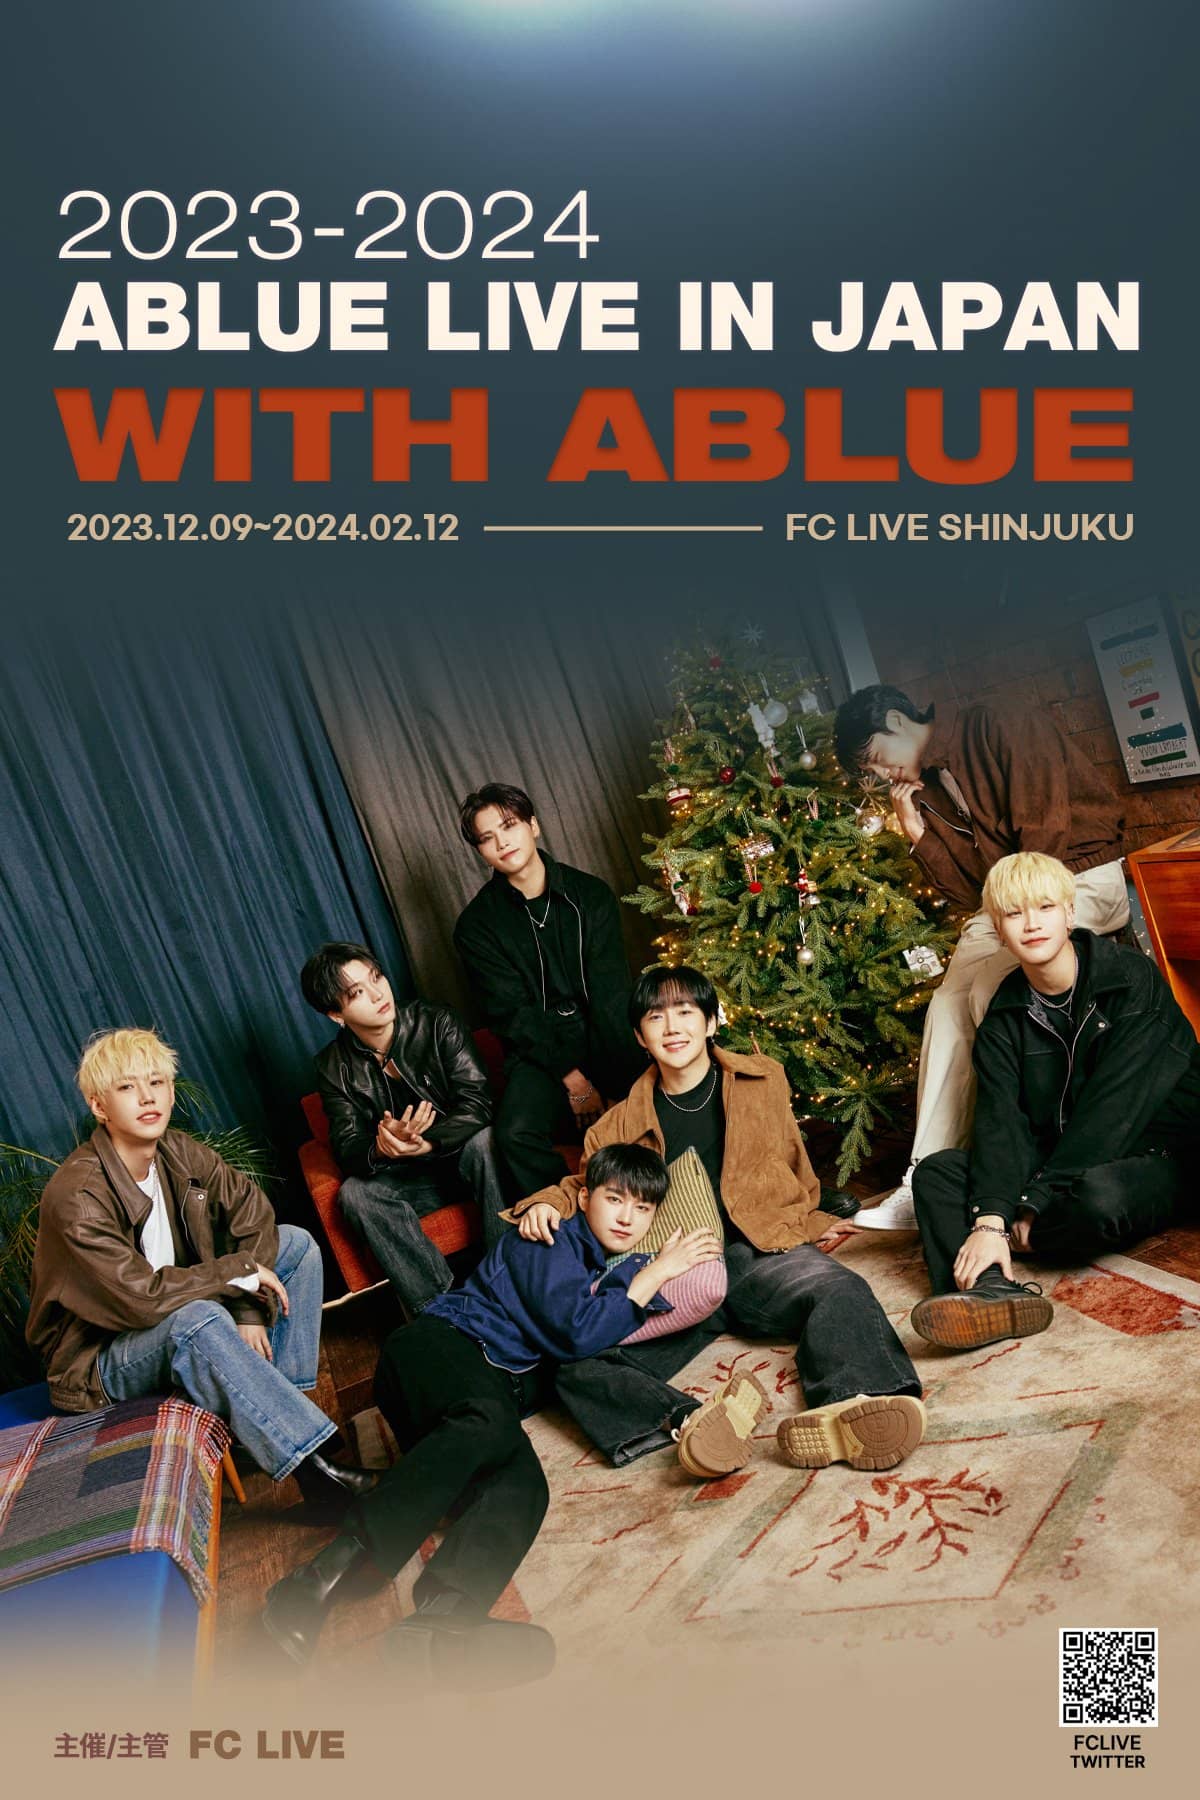 2023-2024 ABLUE LIVE in JAPAN WITH ABLUE